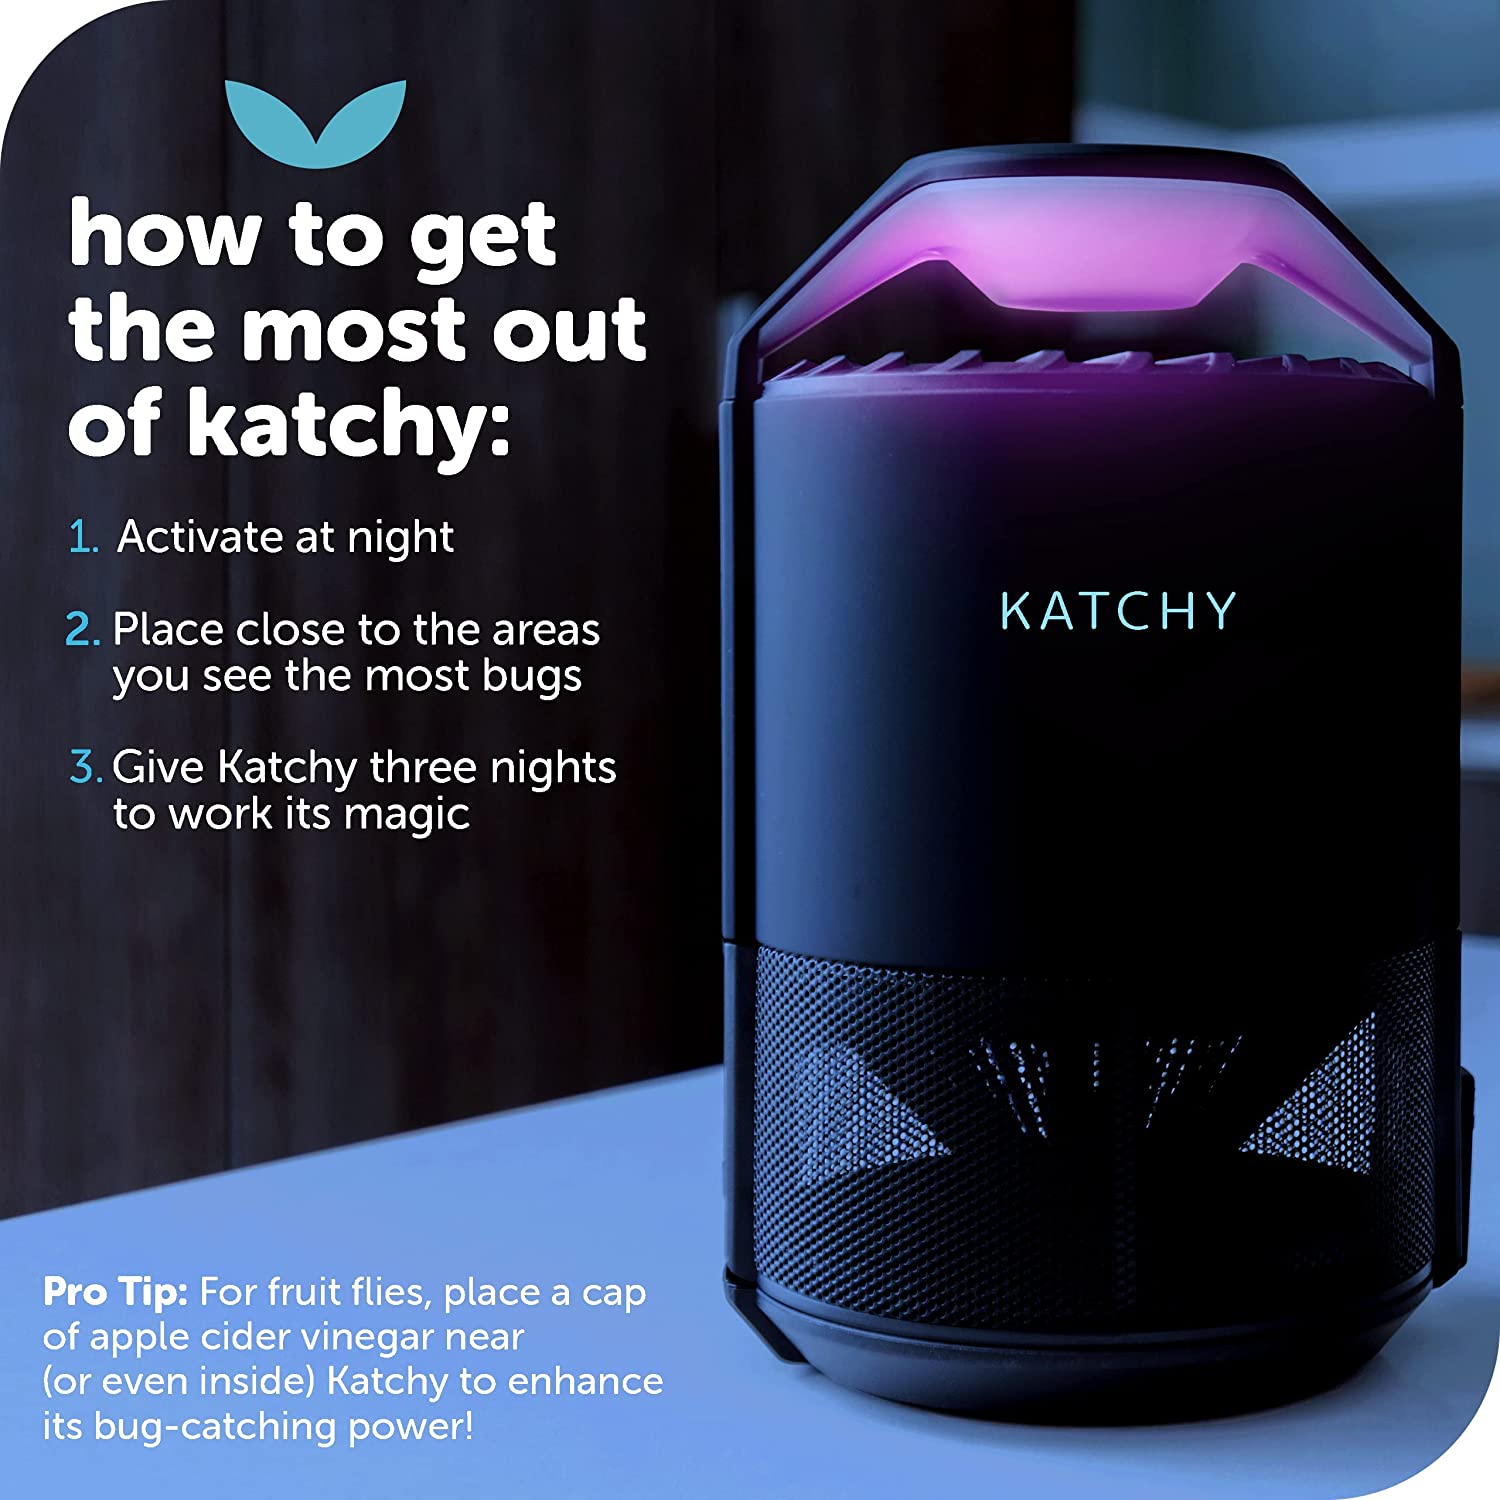 https://discounttoday.net/wp-content/uploads/2022/09/Katchy-Indoor-Insect-Trap-Catcher-Killer-for-Mosquitos-Gnats-Moths-Fruit-Flies-Non-Zapper-Traps-for-Inside-Your-Home-Catch-Insects-Indoors-with-Suction-Bug-Light-Sticky-Glue-Black5.jpg